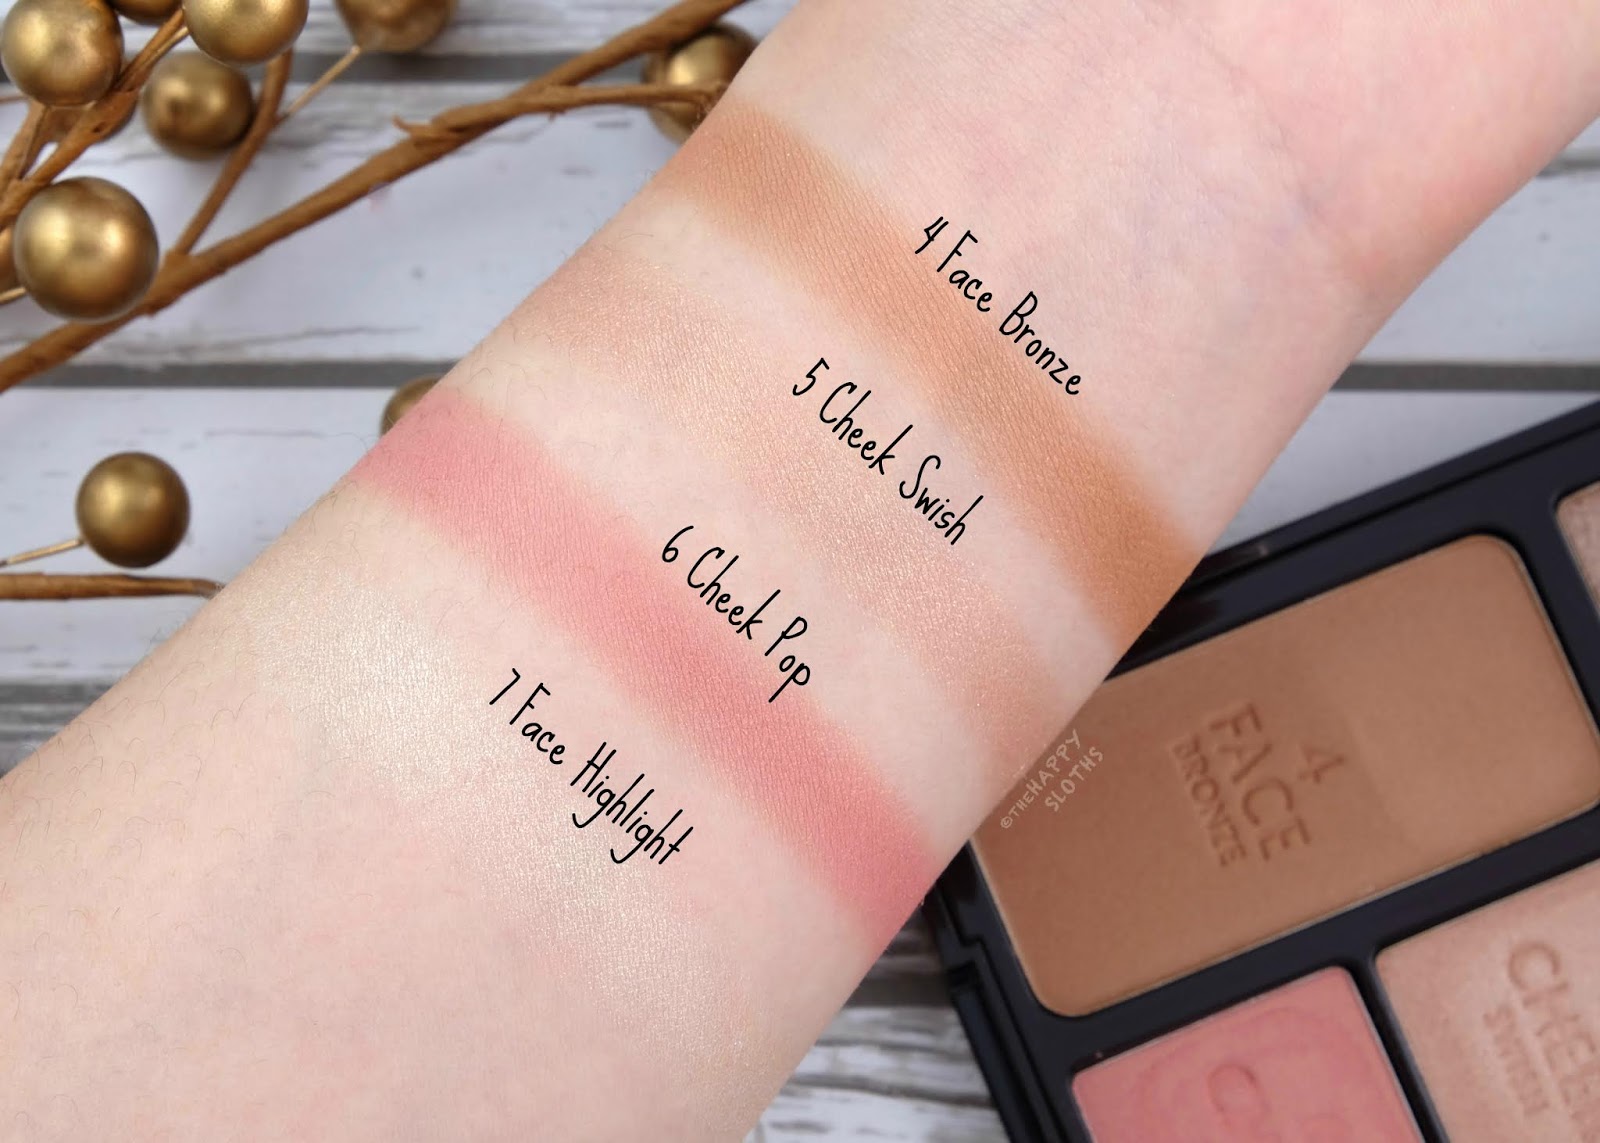 Charlotte Tilbury | Instant Look in a Palette in "Gorgeous, Glowing Beauty": Review and Swatches